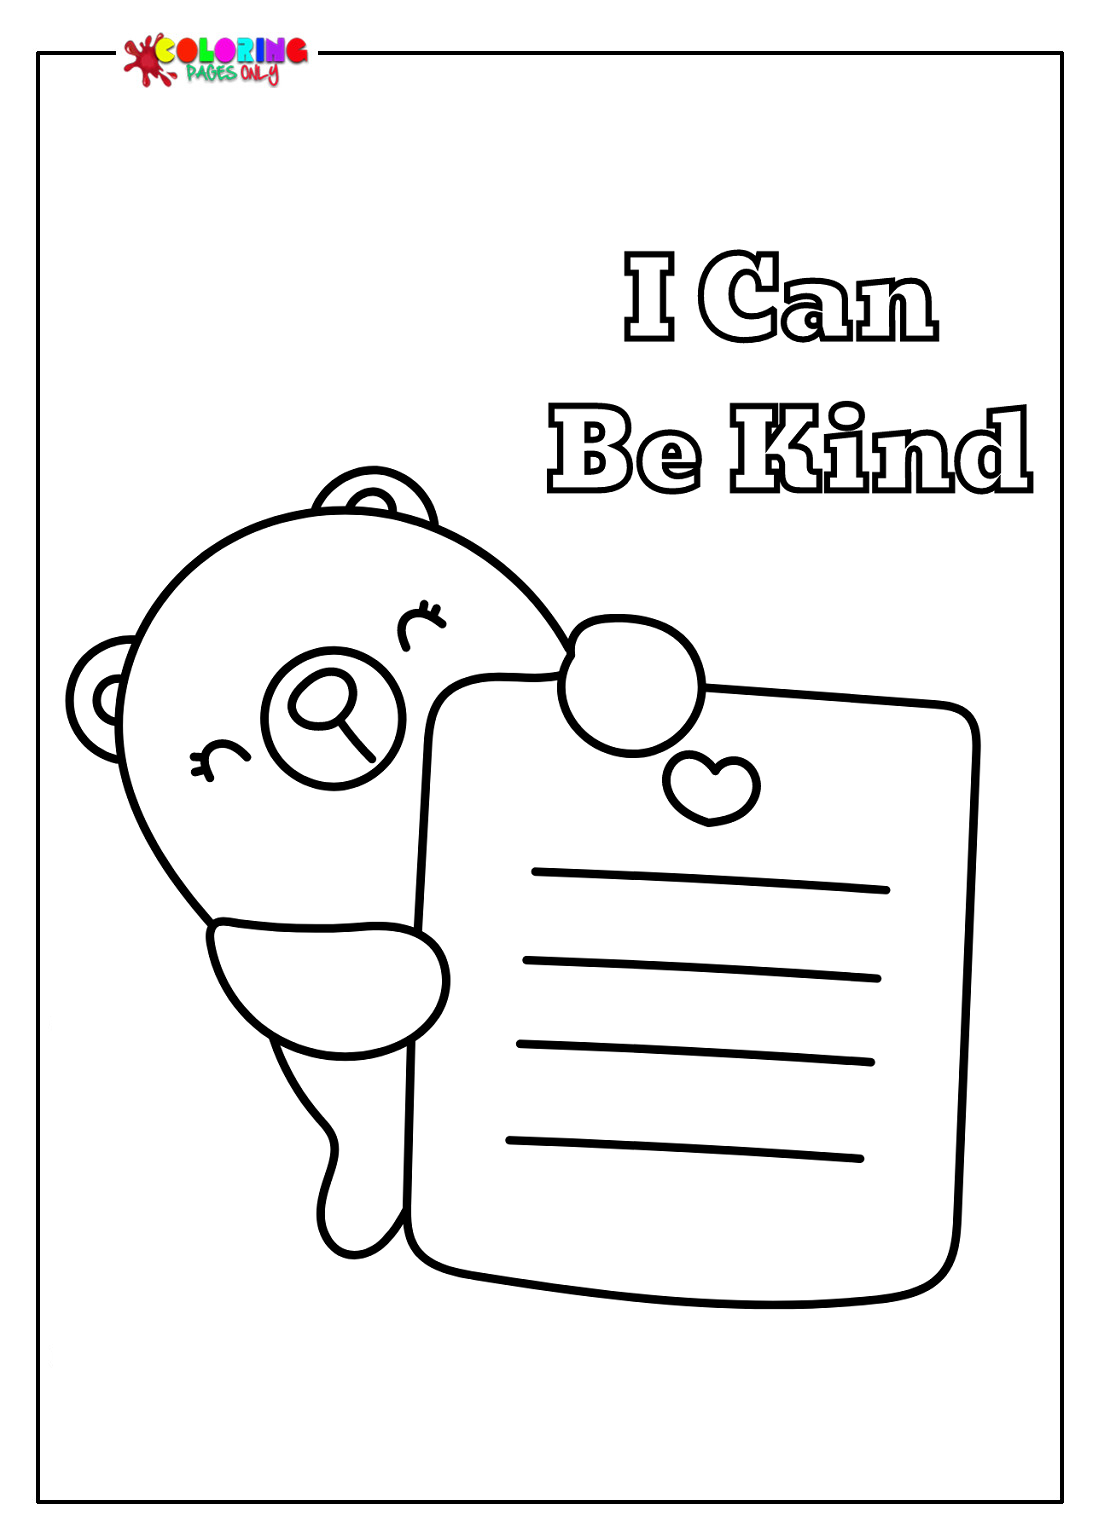 I Can Be Kind Coloring Pages